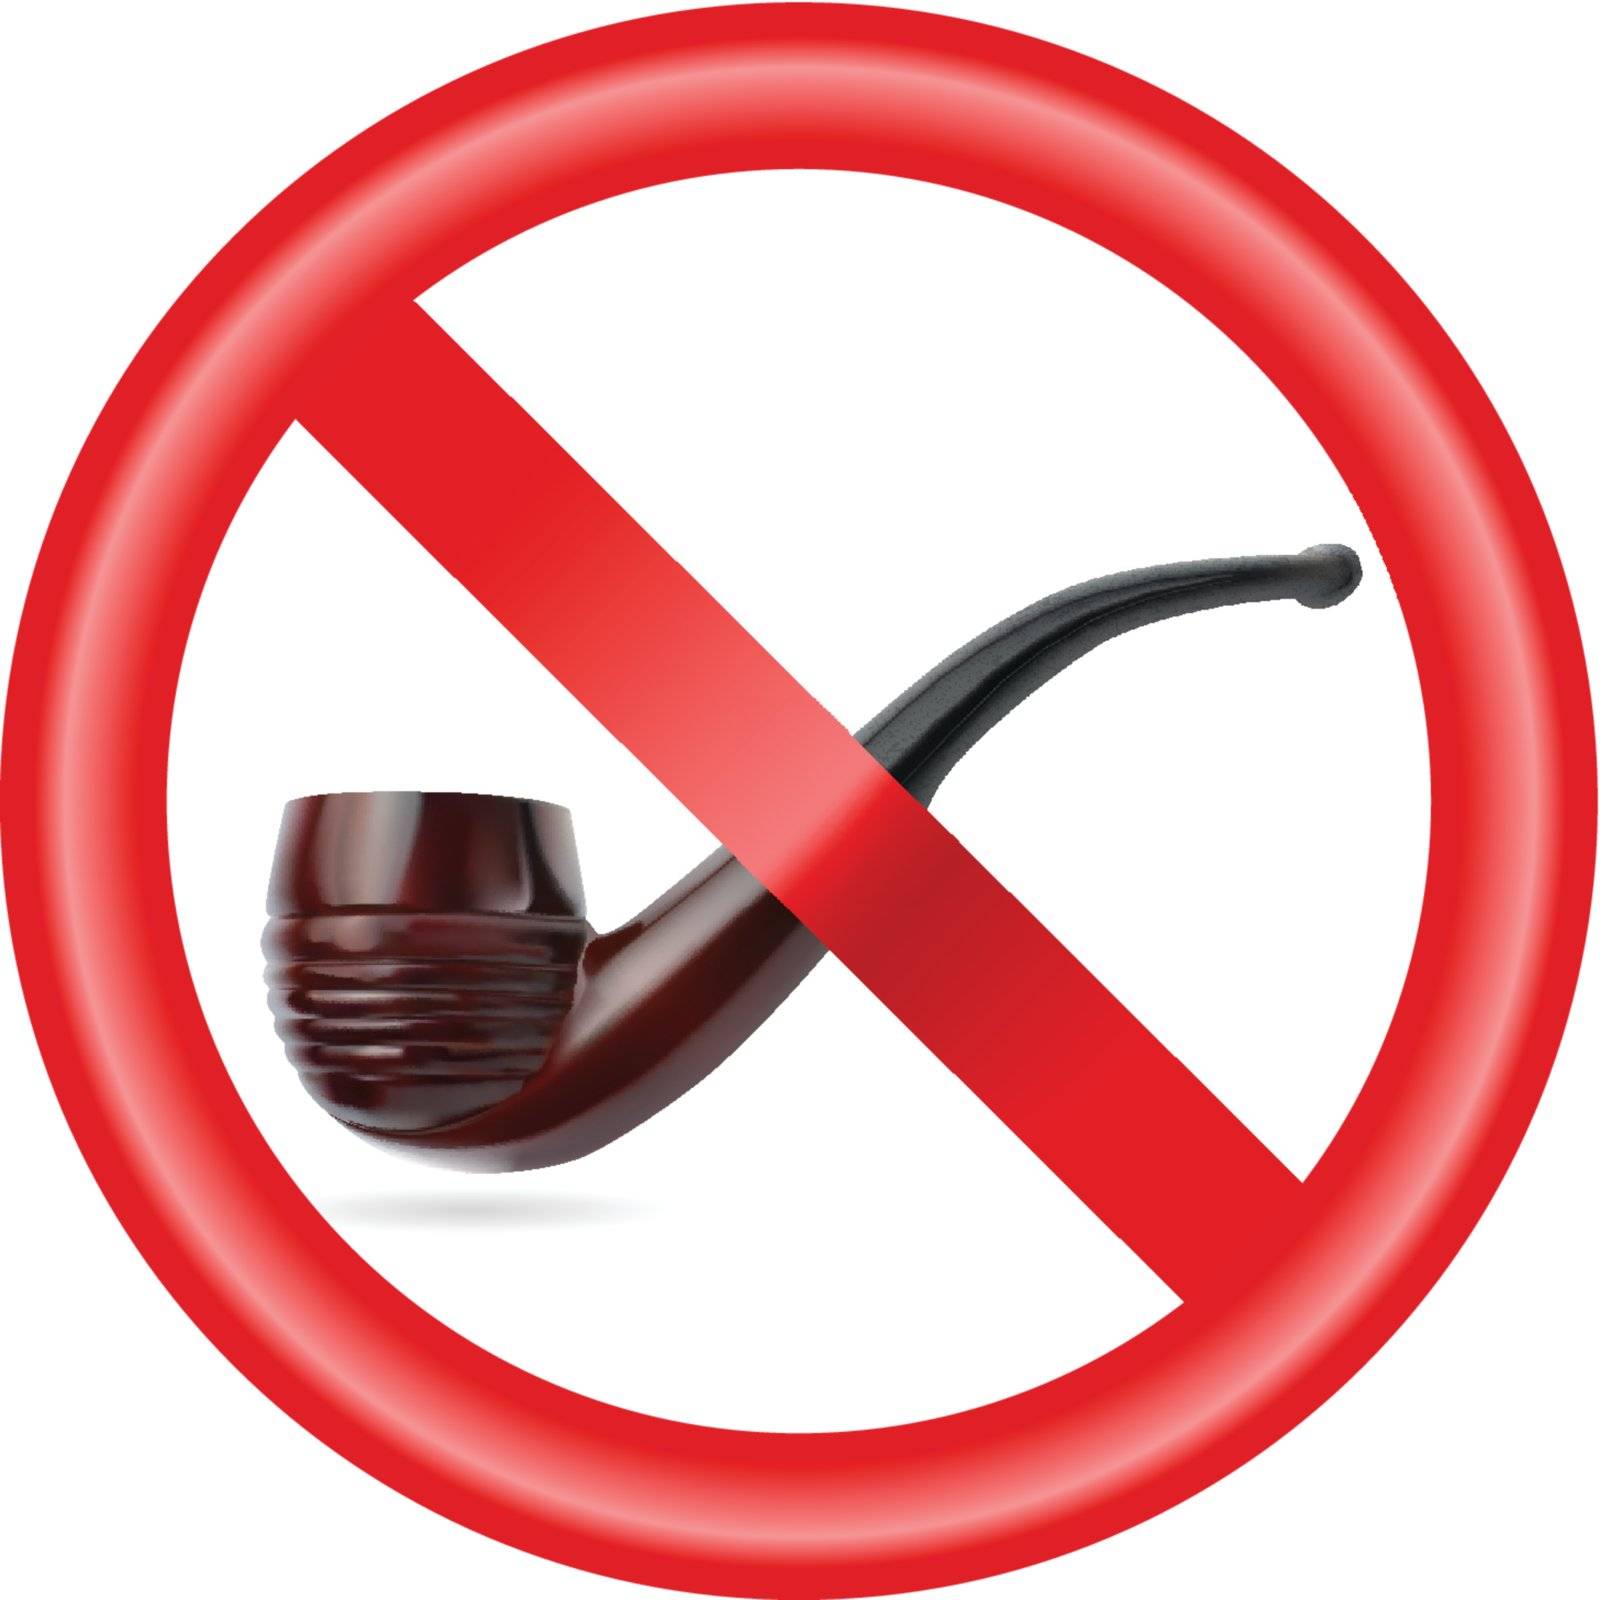 Photorealistic vector image of the Smoking Pipe. Also 2 kinds of 'No smoking' and one 'Yes smoking' signs. Used meshes and blends. Eps 10